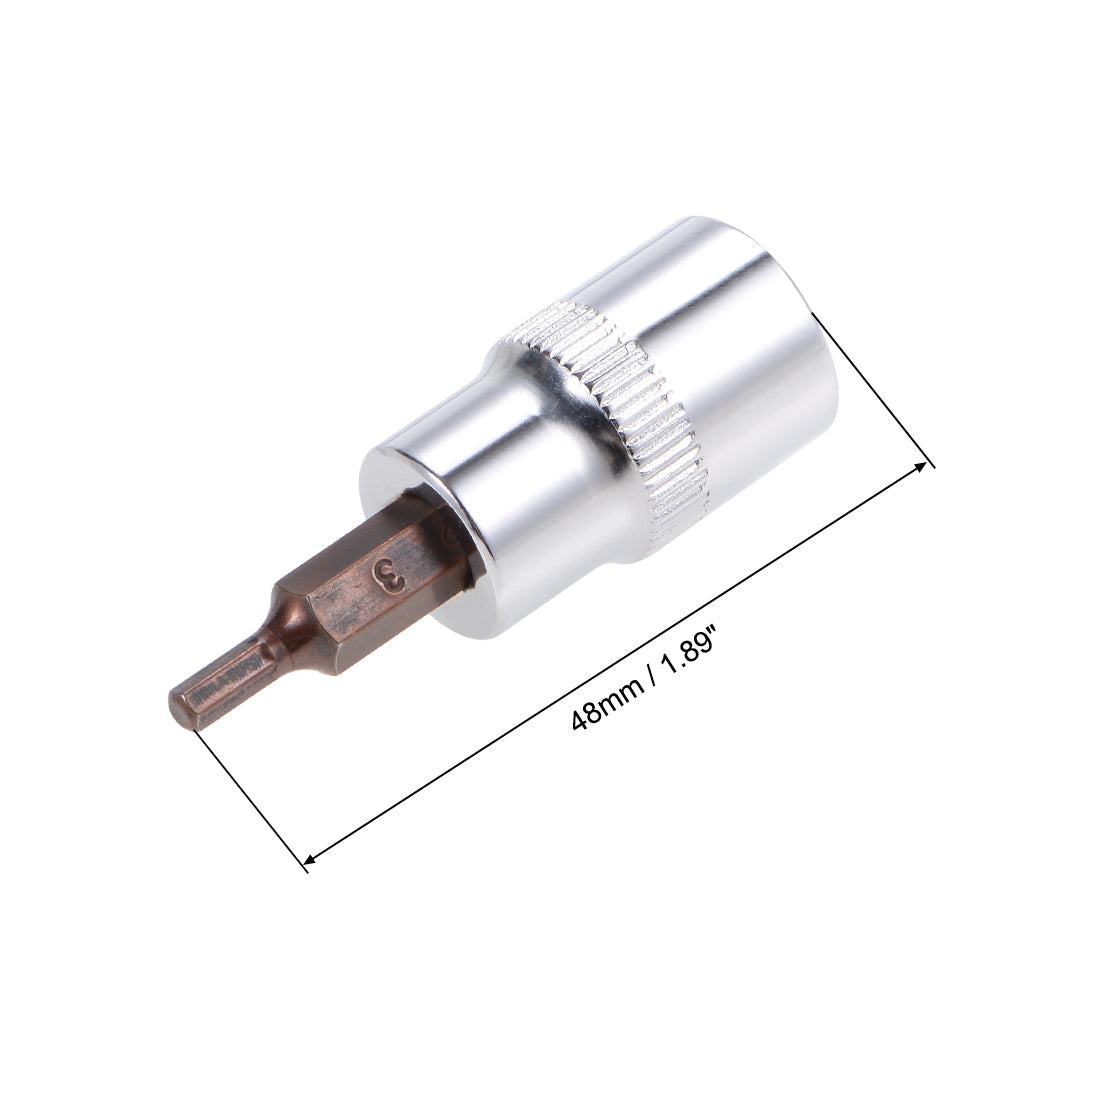 uxcell Uxcell Hex Bit Sockets, S2 Steel Bits, CR-V Sockets (for Hand Use Only)